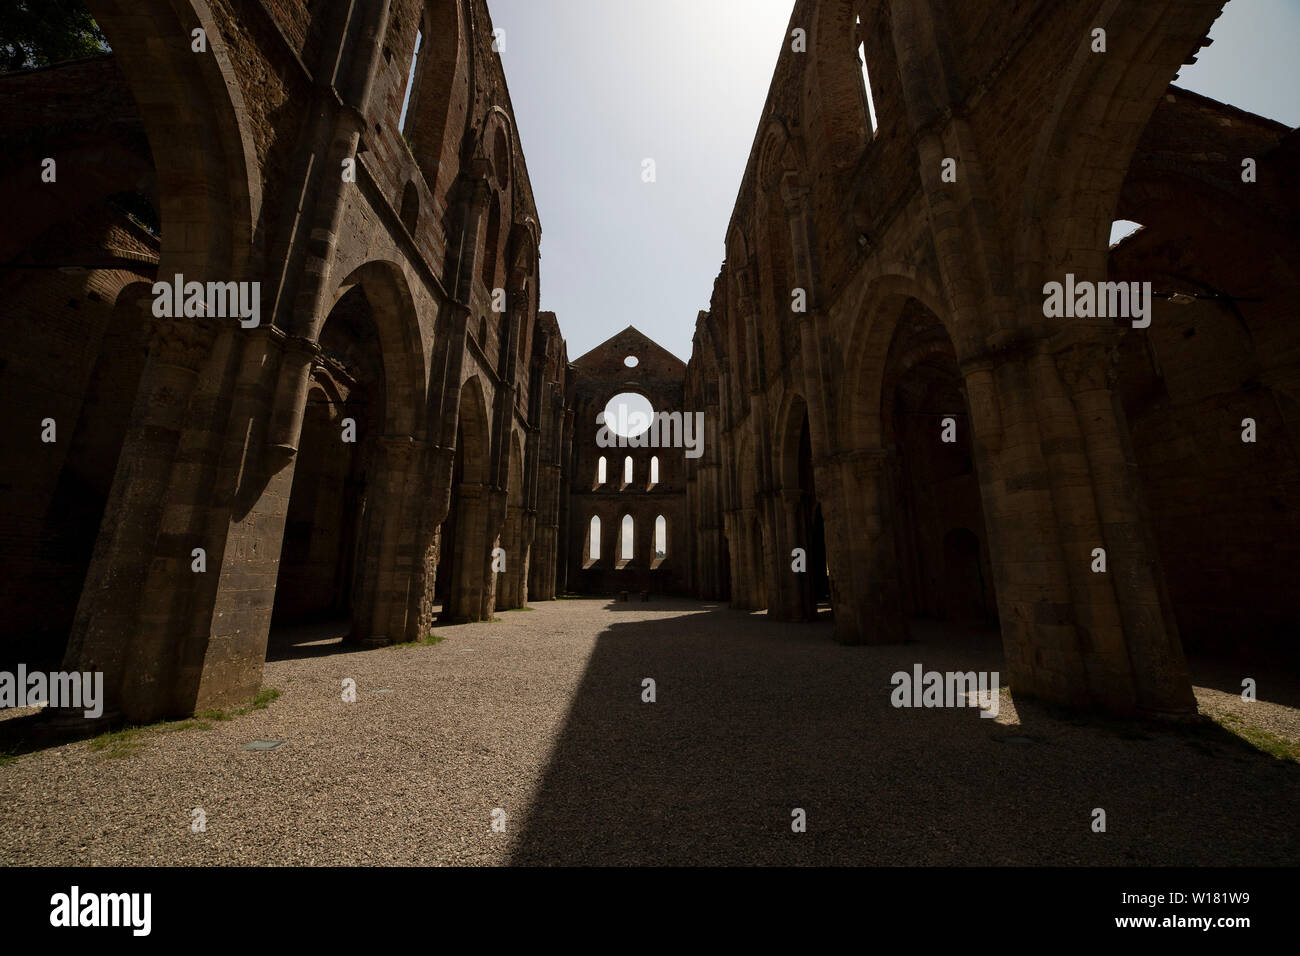 The central nave of the roofless gothic abbey of San Galgano, located in the tuscan countryside, on a sunny day. Chiusdino, Italy. Stock Photo